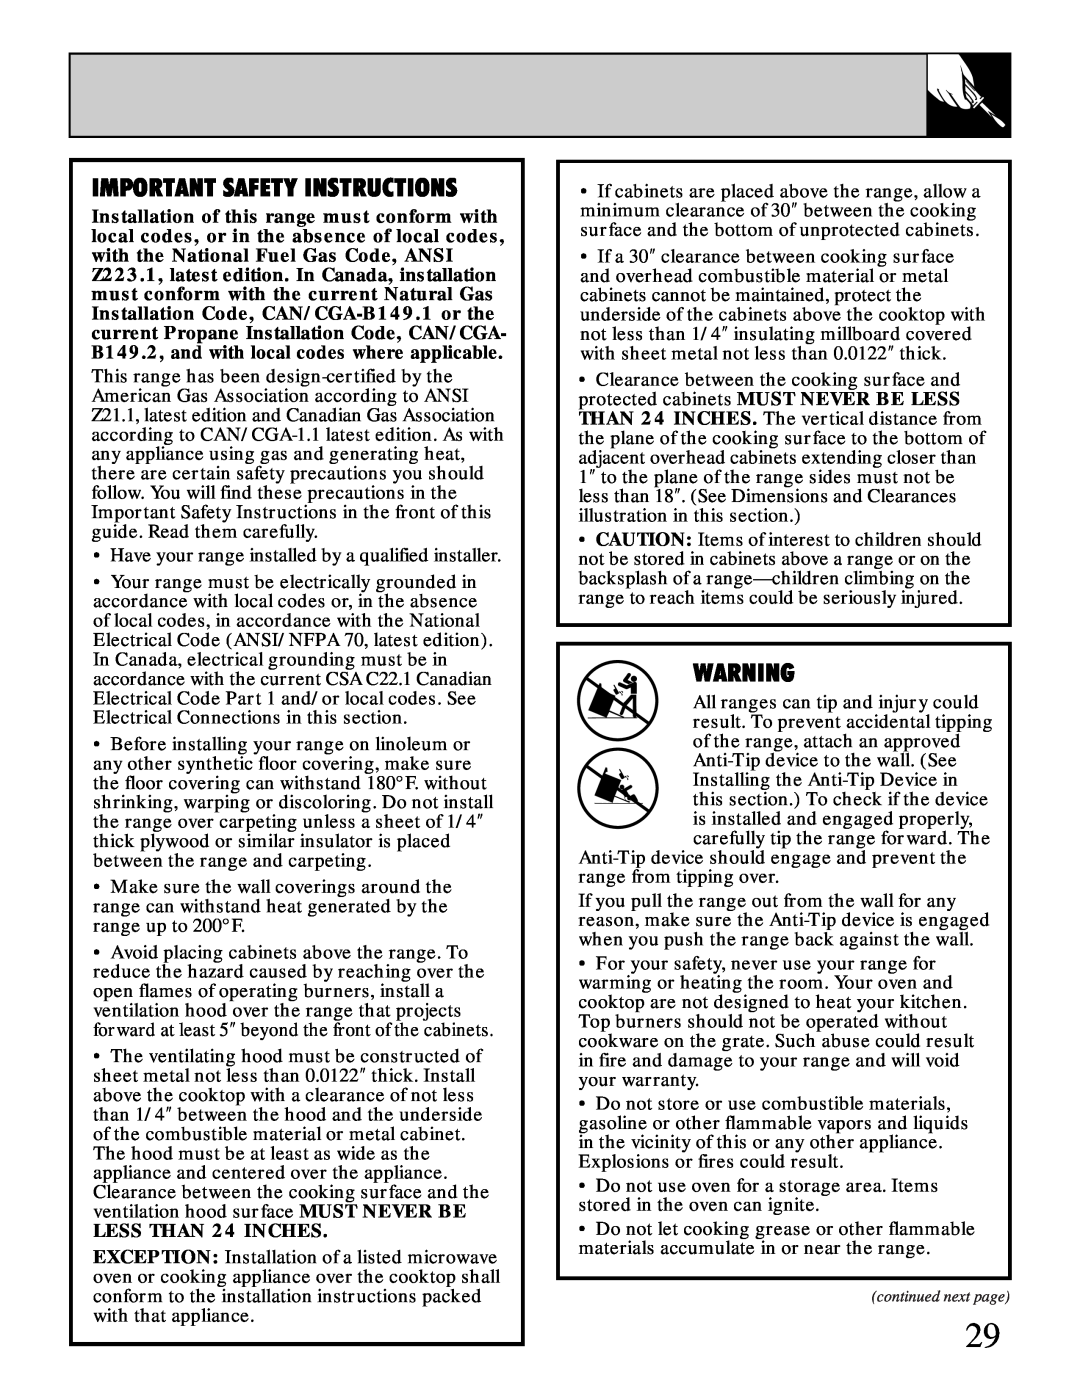 GE XL44TM installation instructions Important Safety Instructions, LESS THAN 24 INCHES 